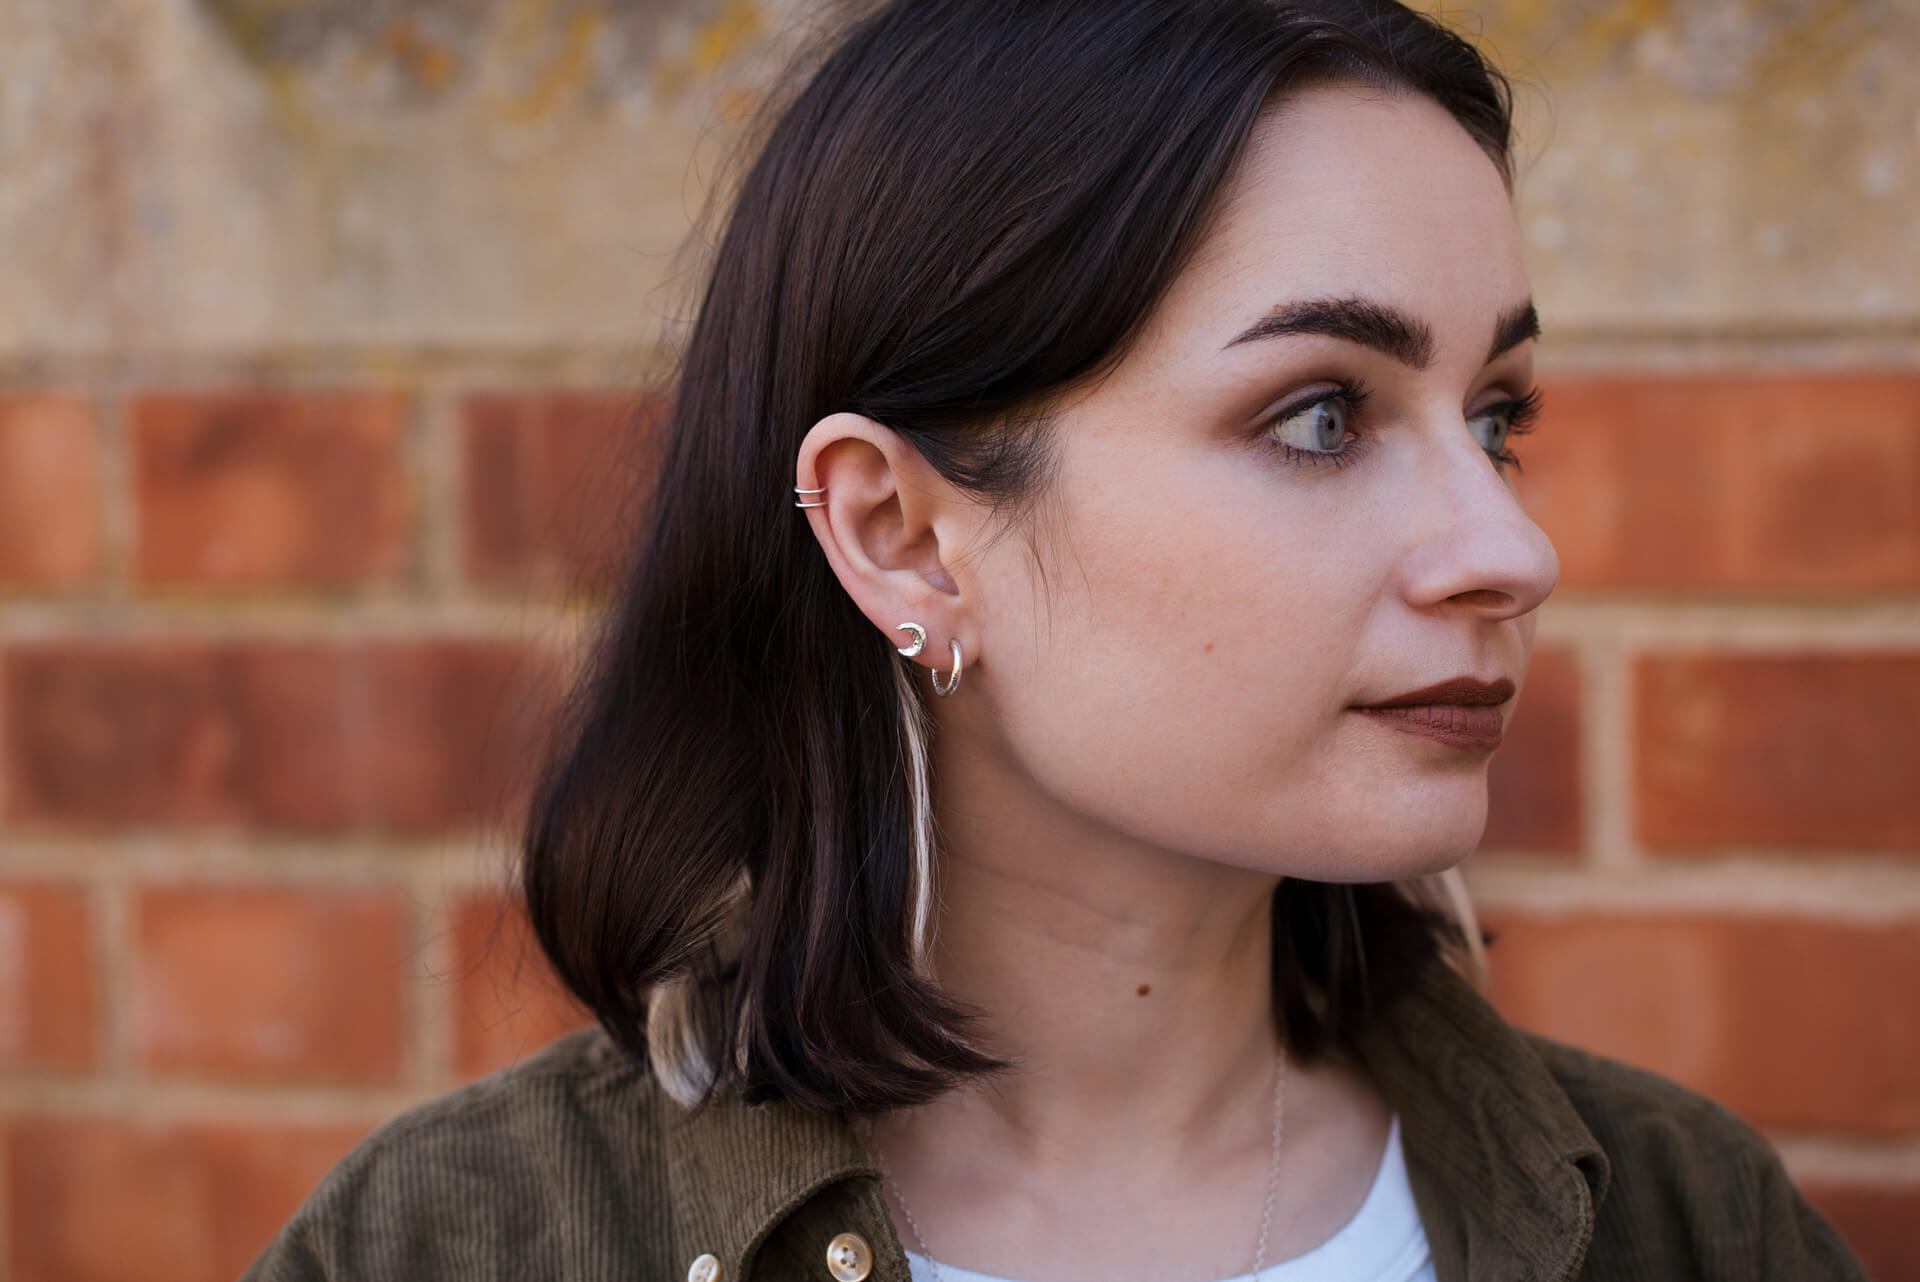 Young woman with dark hair wearing three sterling silver earrings.